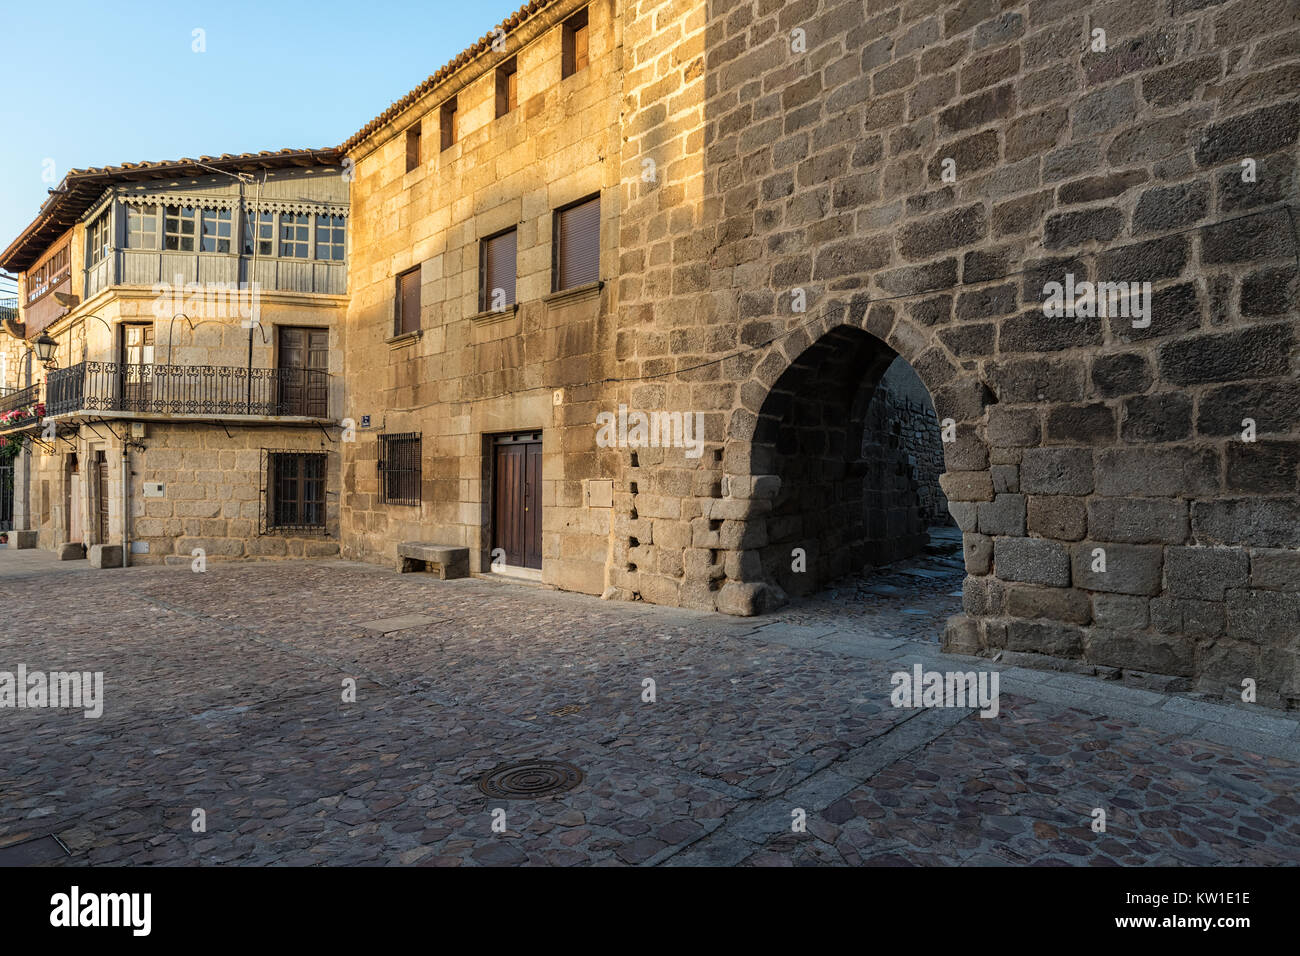 Side of the main square in the historical town of San Felices de los Gallegos. Spain. Stock Photo